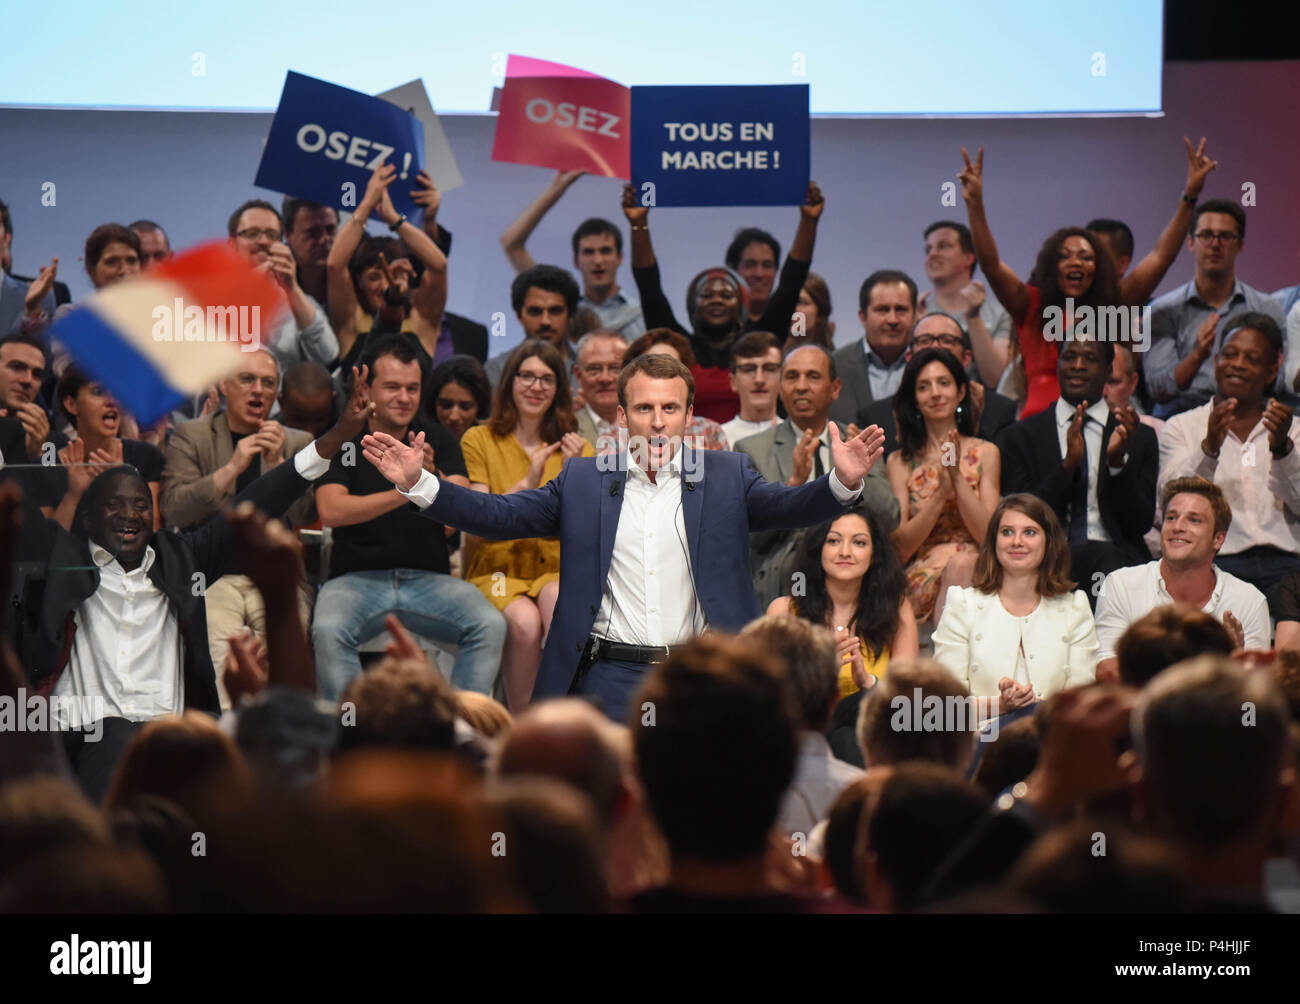 July 12, 2016 - Paris, France: French economy minister Emmanuel Macron holds the first political rally of his movement 'En Marche!' ('On the Move!'), at the Maison de la Mutualite, an event widely seen as a prelude to a run for the 2017 presidential election. Emmanuel Macron tient son premier grand rassemblement politique avec son mouvement 'En Marche!', premier jalon de sa campagne pour la prŽsidentielle de 2017. Stock Photo